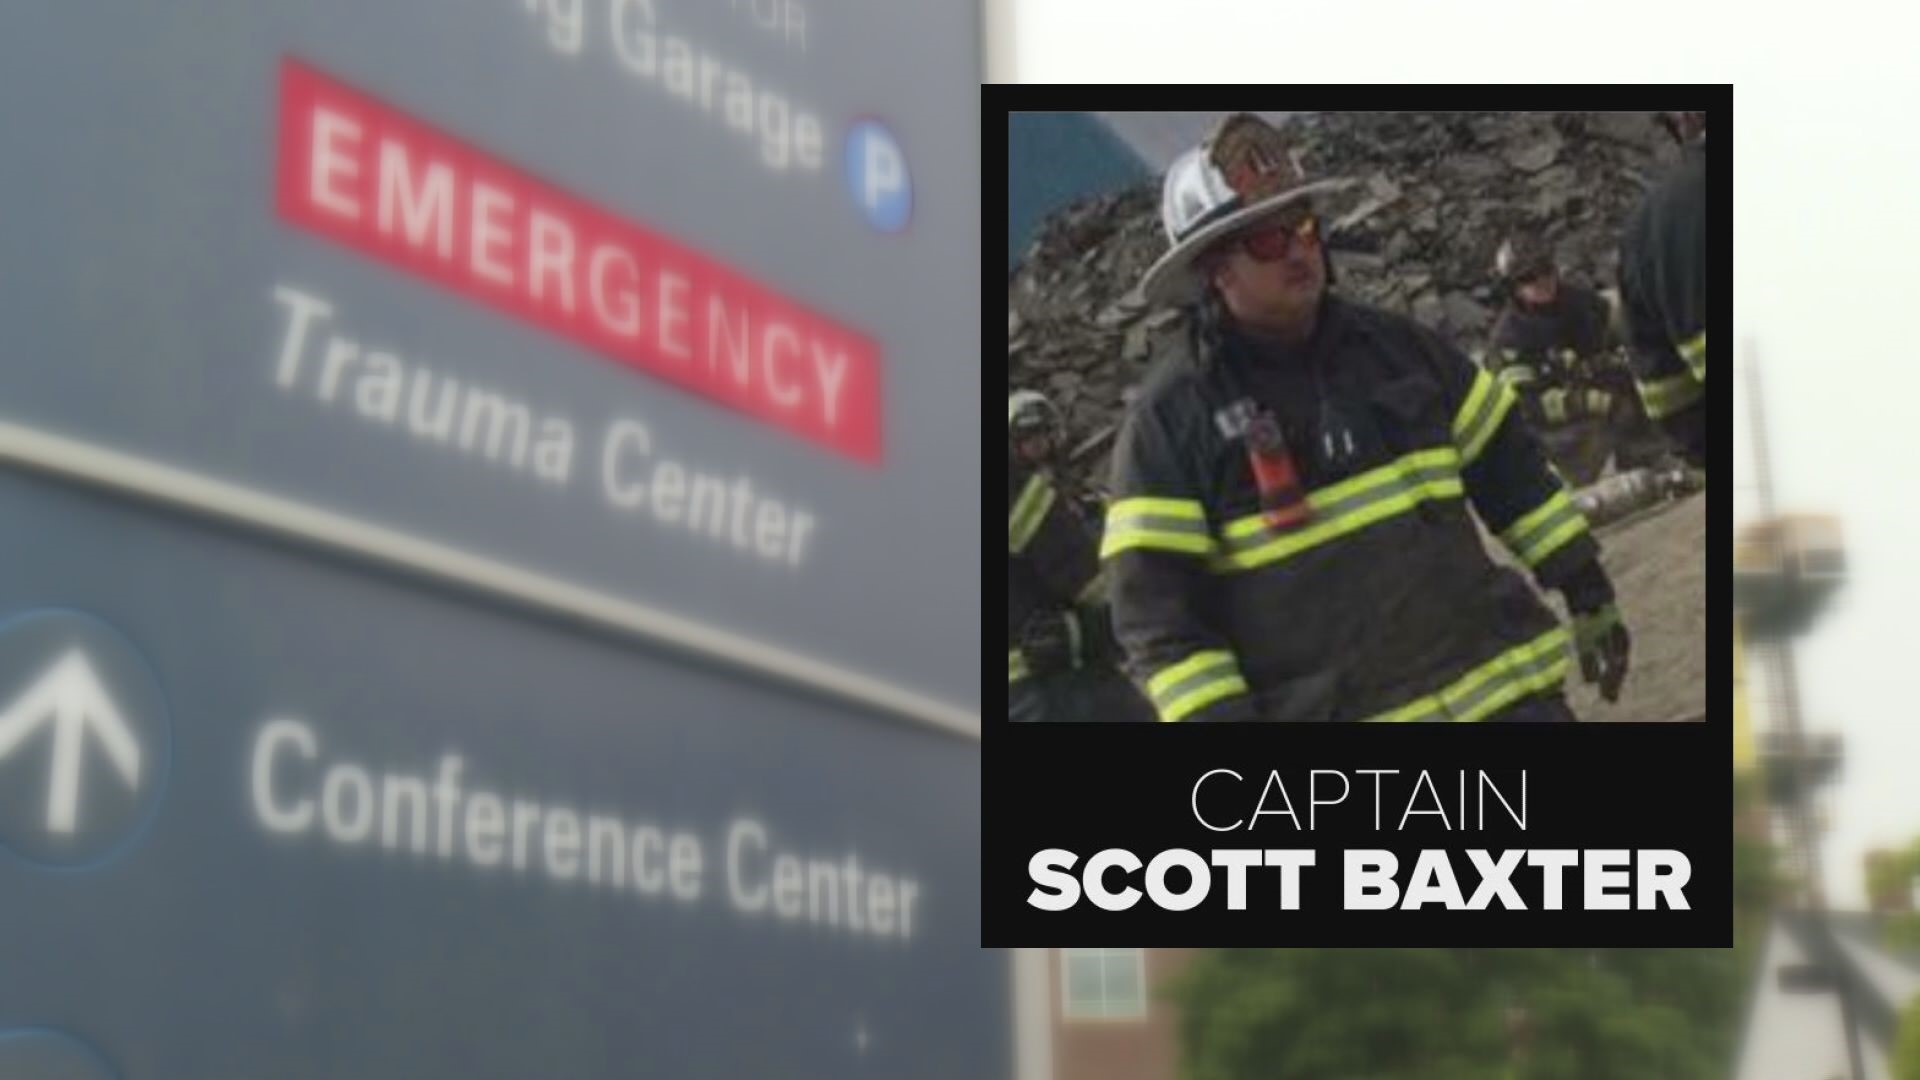 Baxter will be the final firefighter injured in the explosion to be escorted back home to Farmington Thursday.